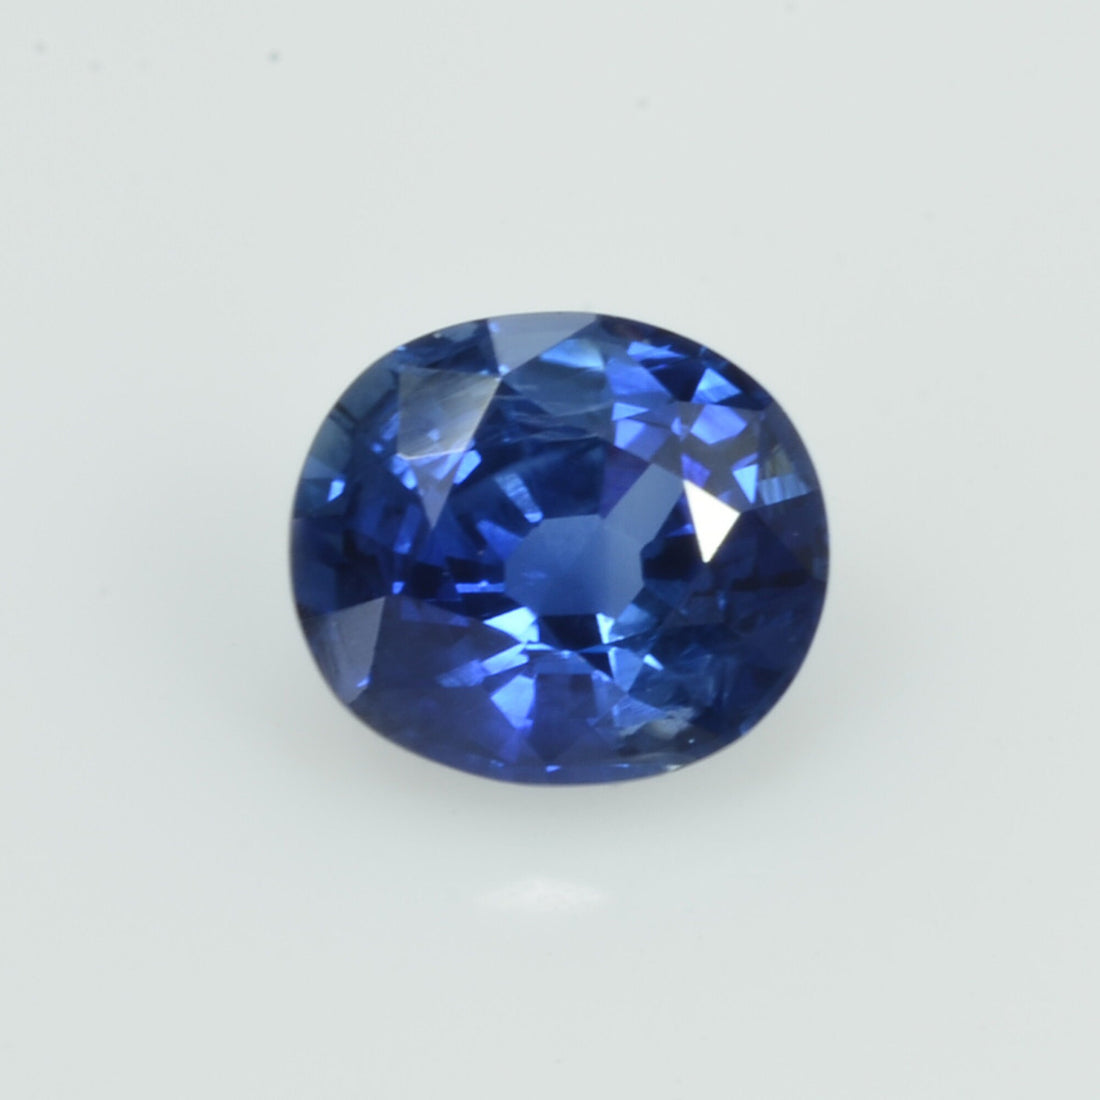 0.98 cts Natural Blue Sapphire Loose Gemstone Oval Cut